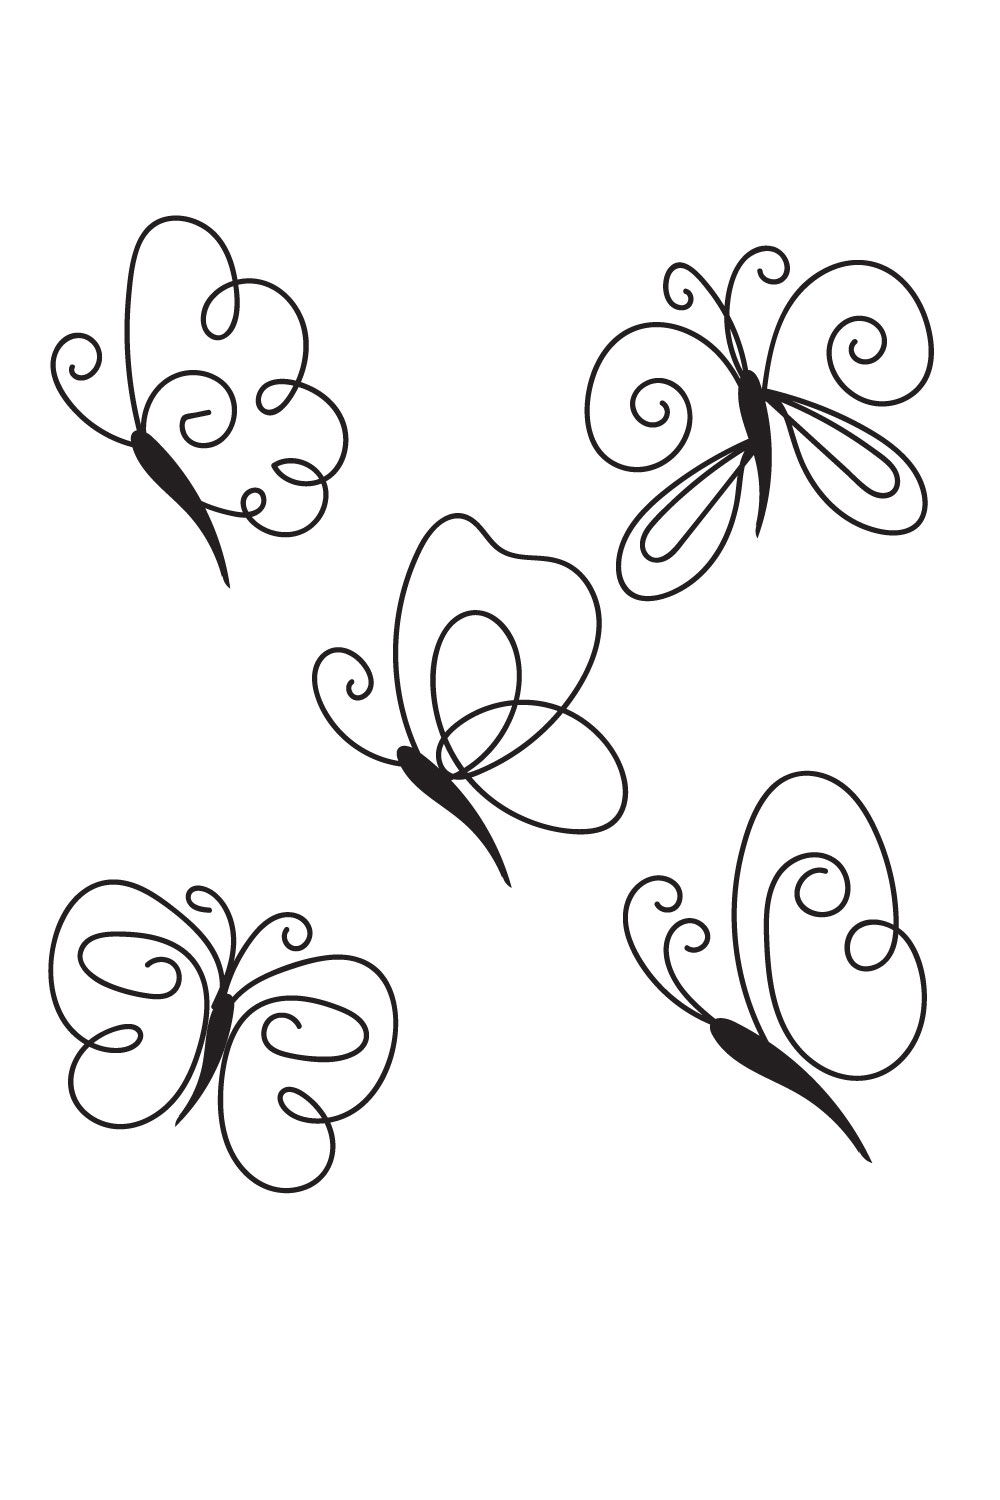 Set of four butterfly tattoos on a white background.